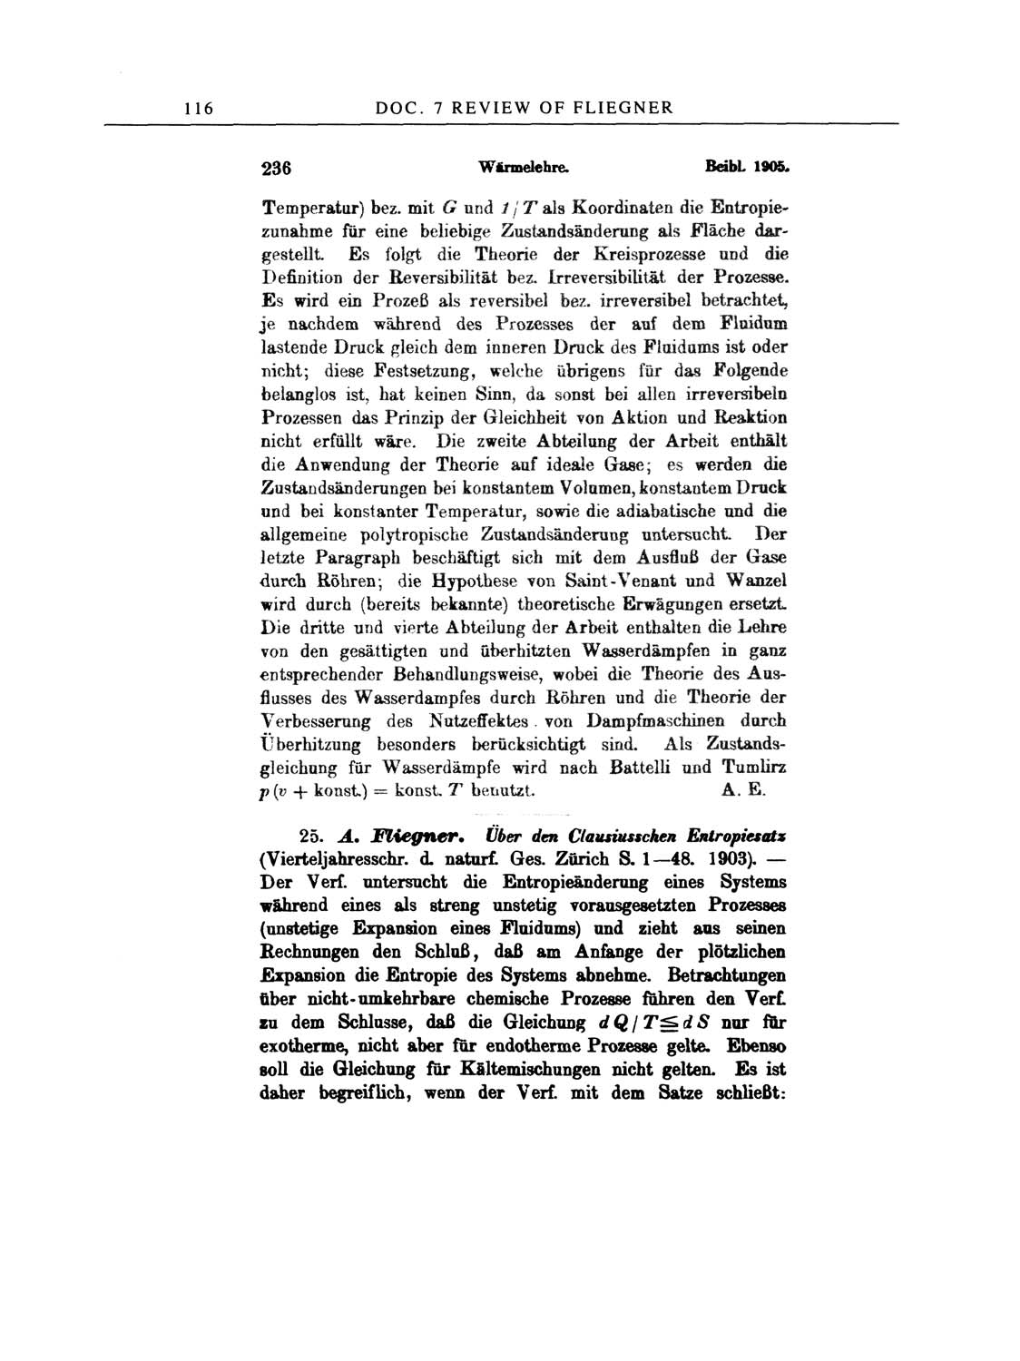 Volume 2: The Swiss Years: Writings, 1900-1909 page 116